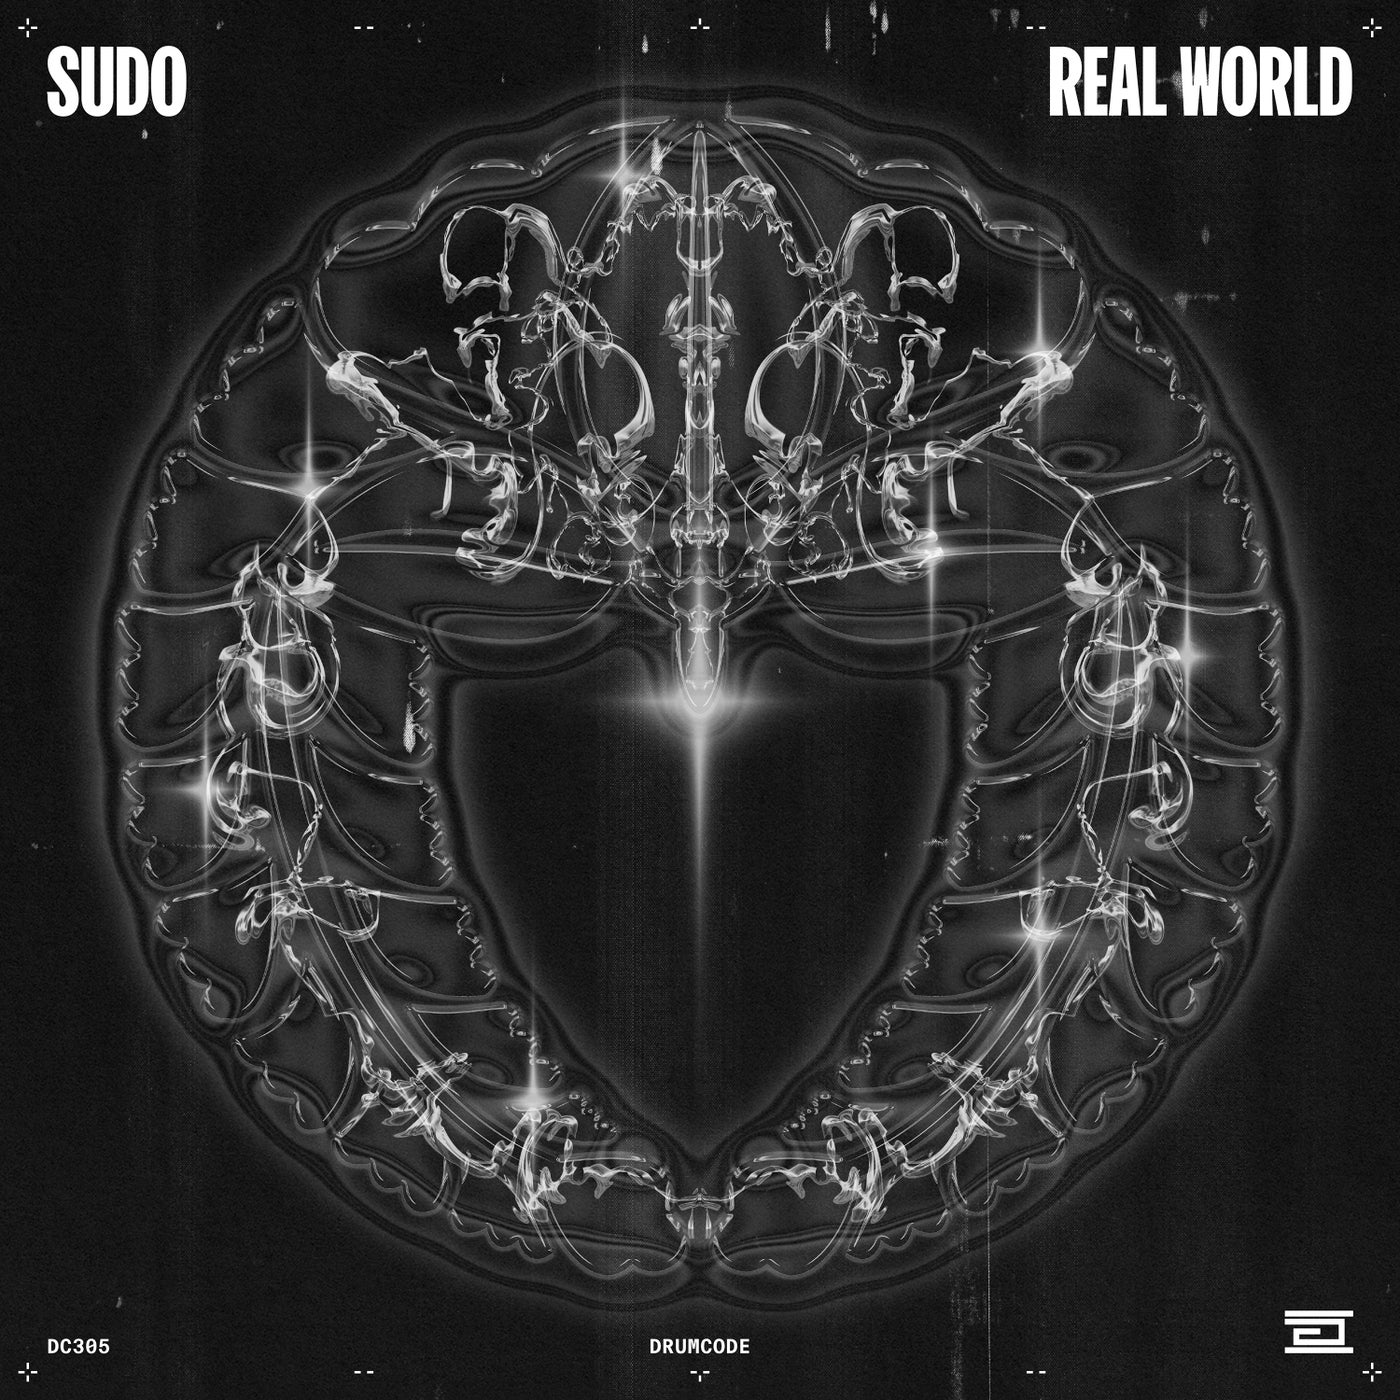 image cover: SUDO - Real World on Drumcode